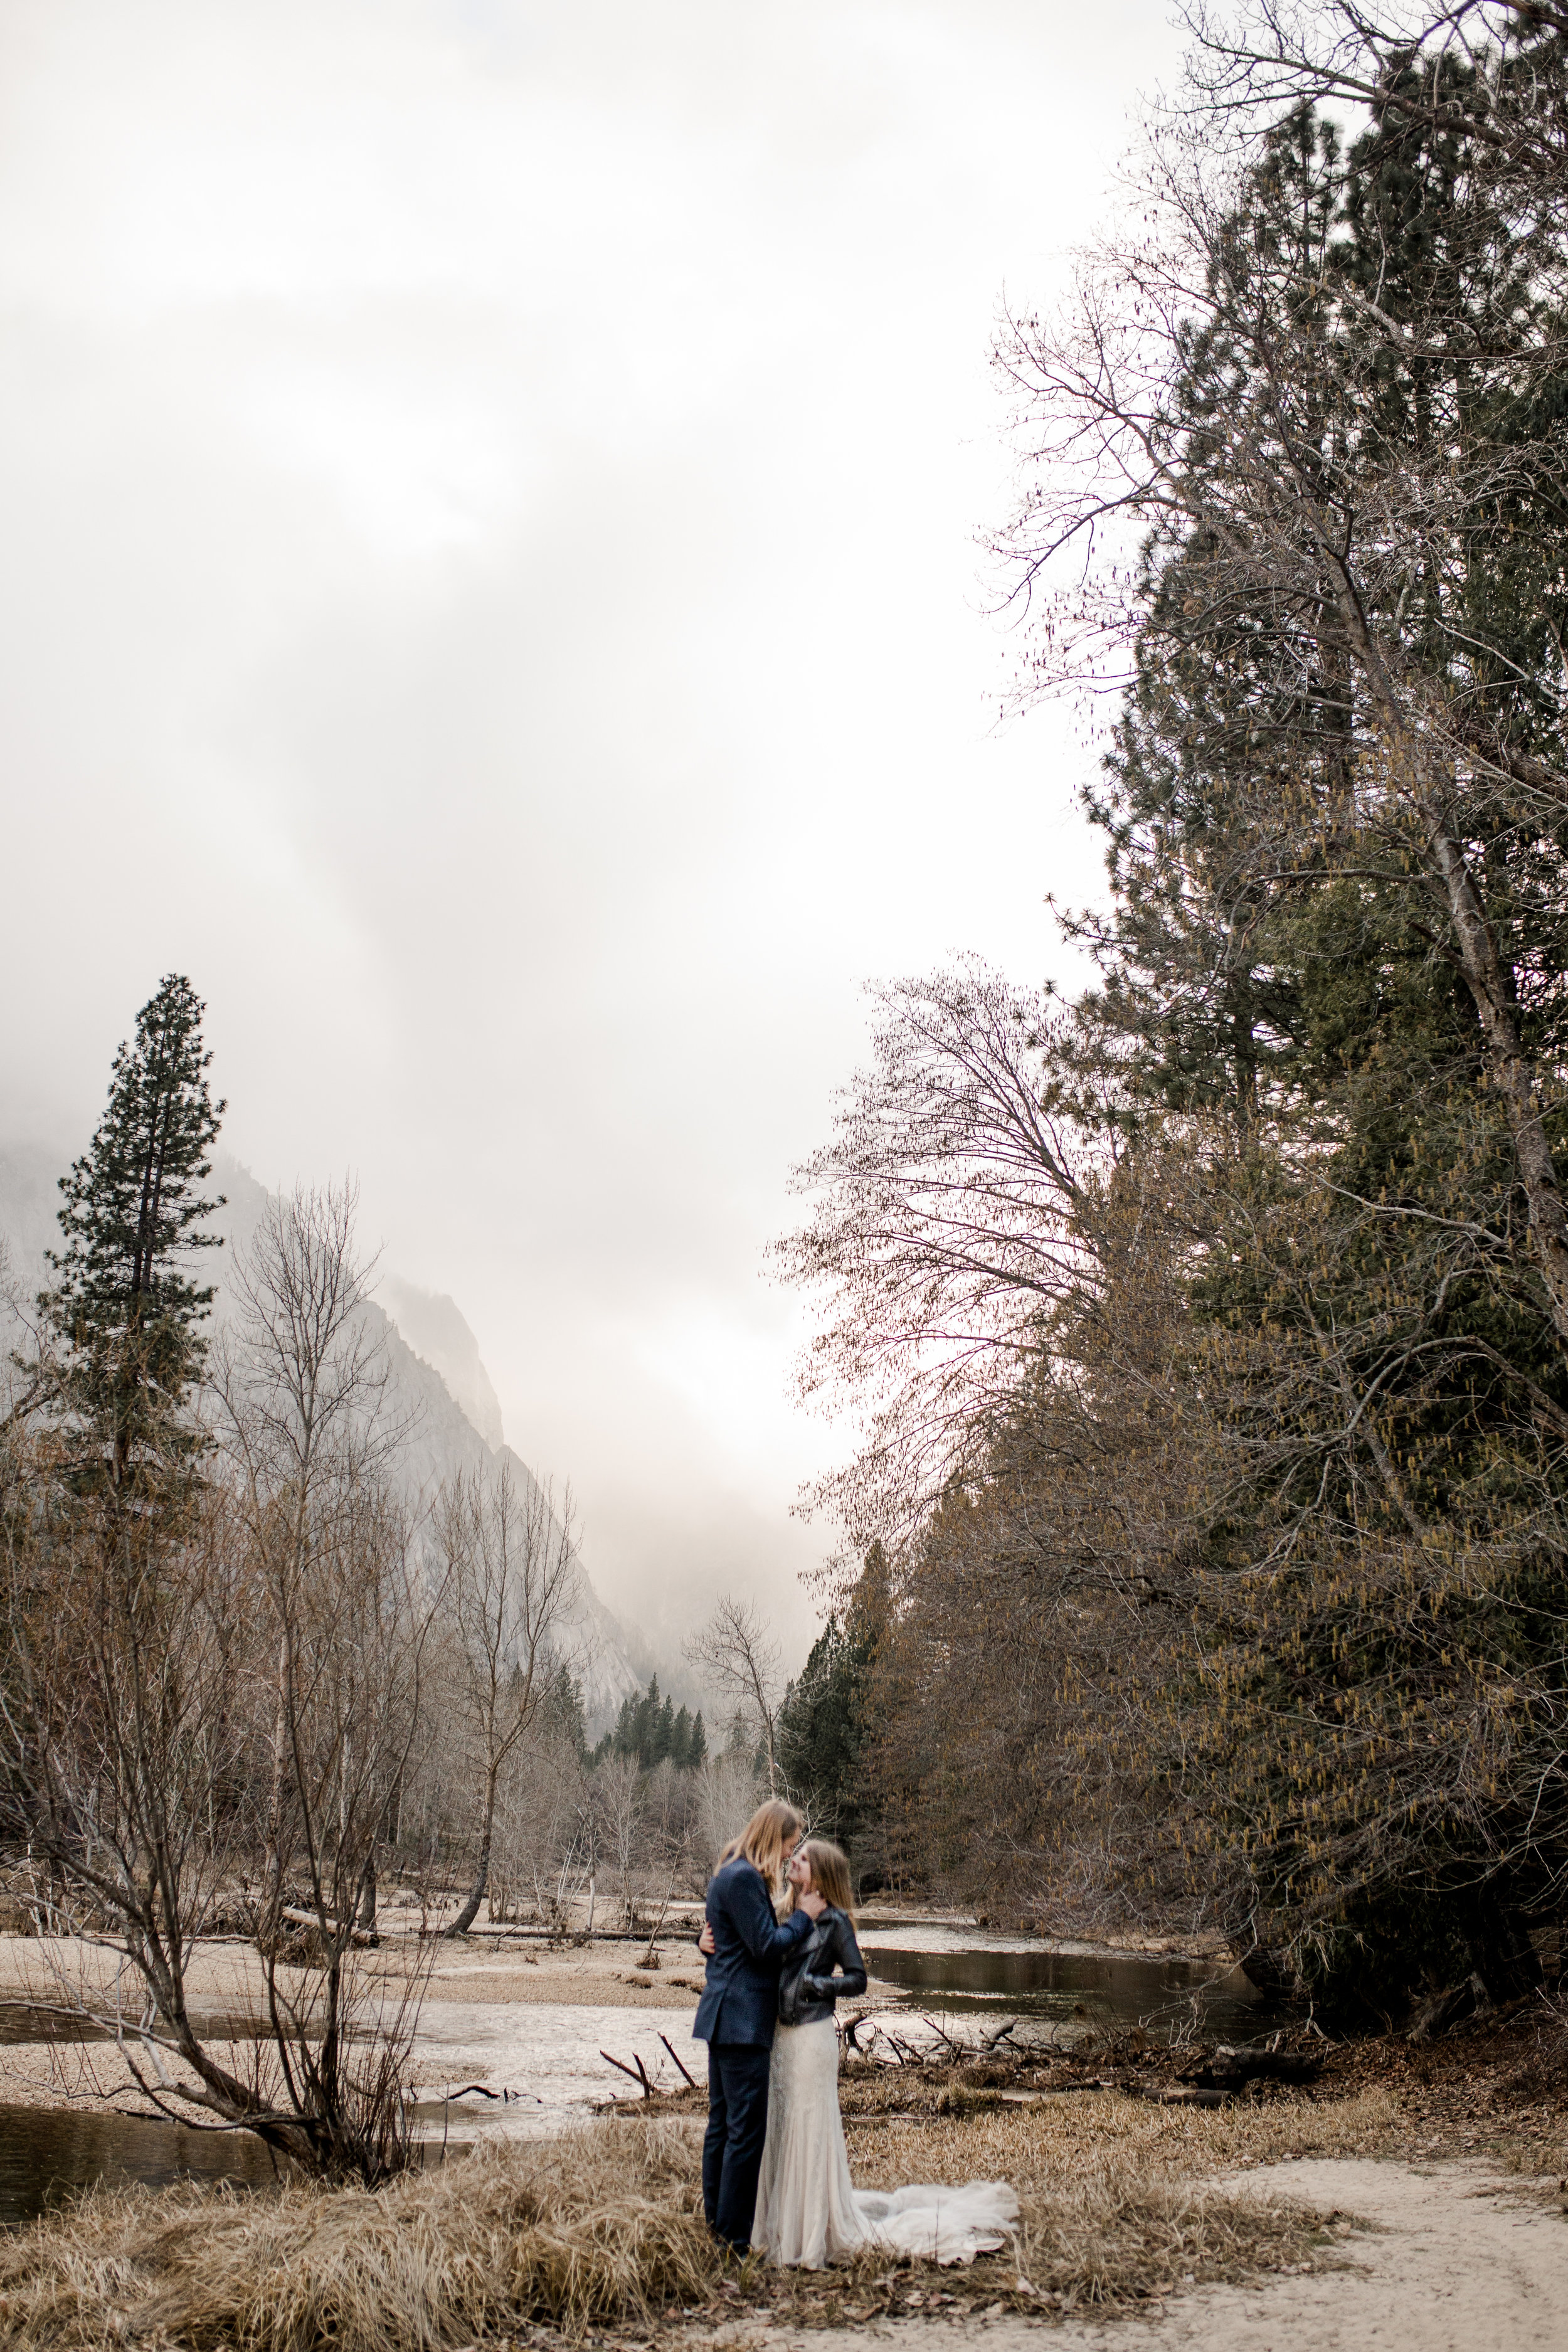 nicole-daacke-photography-yousemite-national-park-elopement-photographer-winter-cloud-moody-elope-inspiration-yosemite-valley-tunnel-view-winter-cloud-fog-weather-wedding-photos-45.jpg